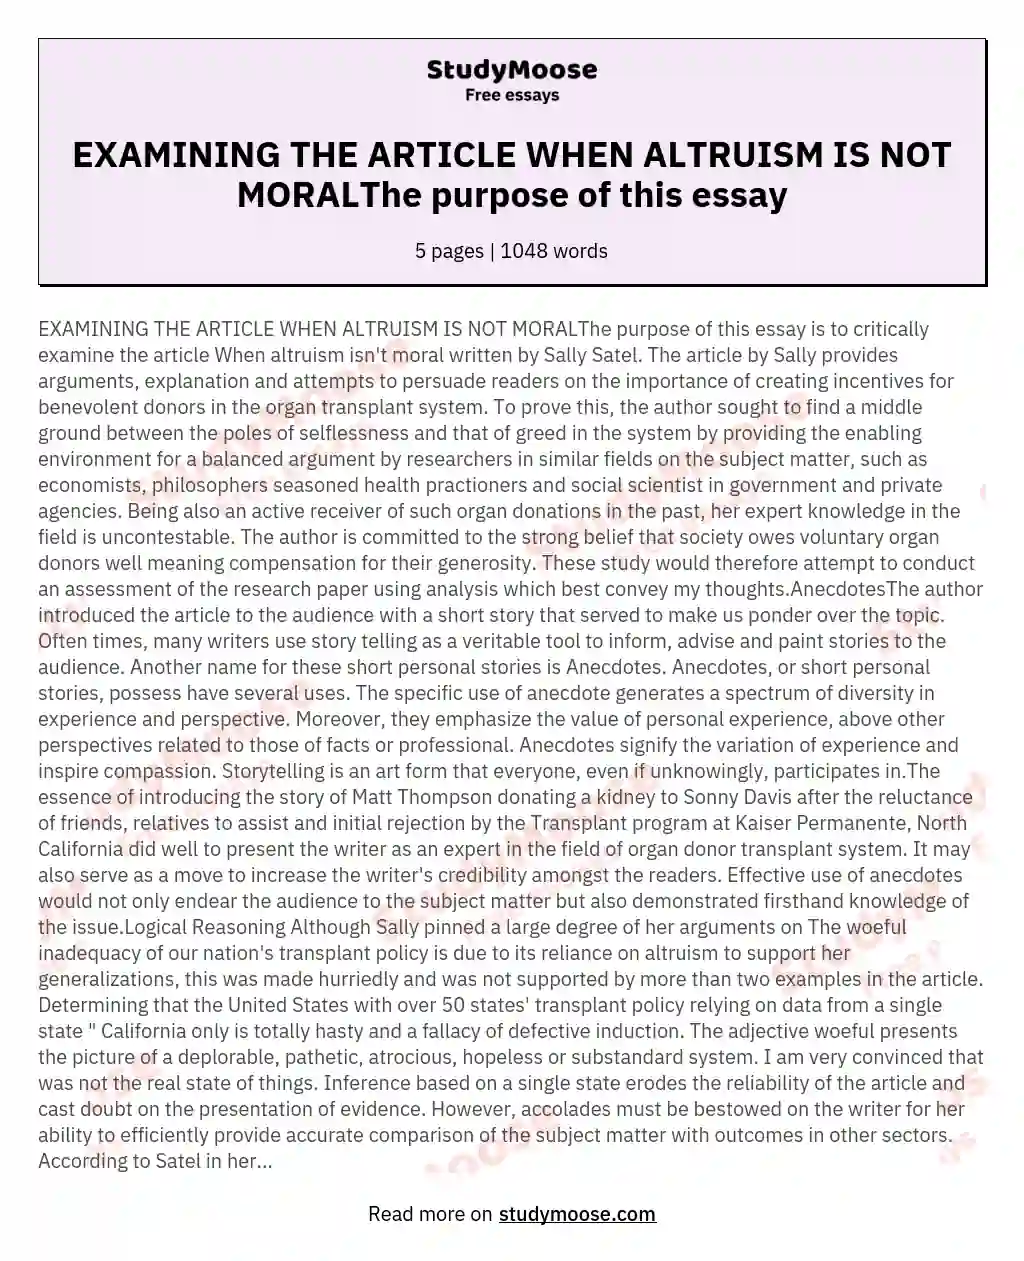 EXAMINING THE ARTICLE WHEN ALTRUISM IS NOT MORALThe purpose of this essay essay